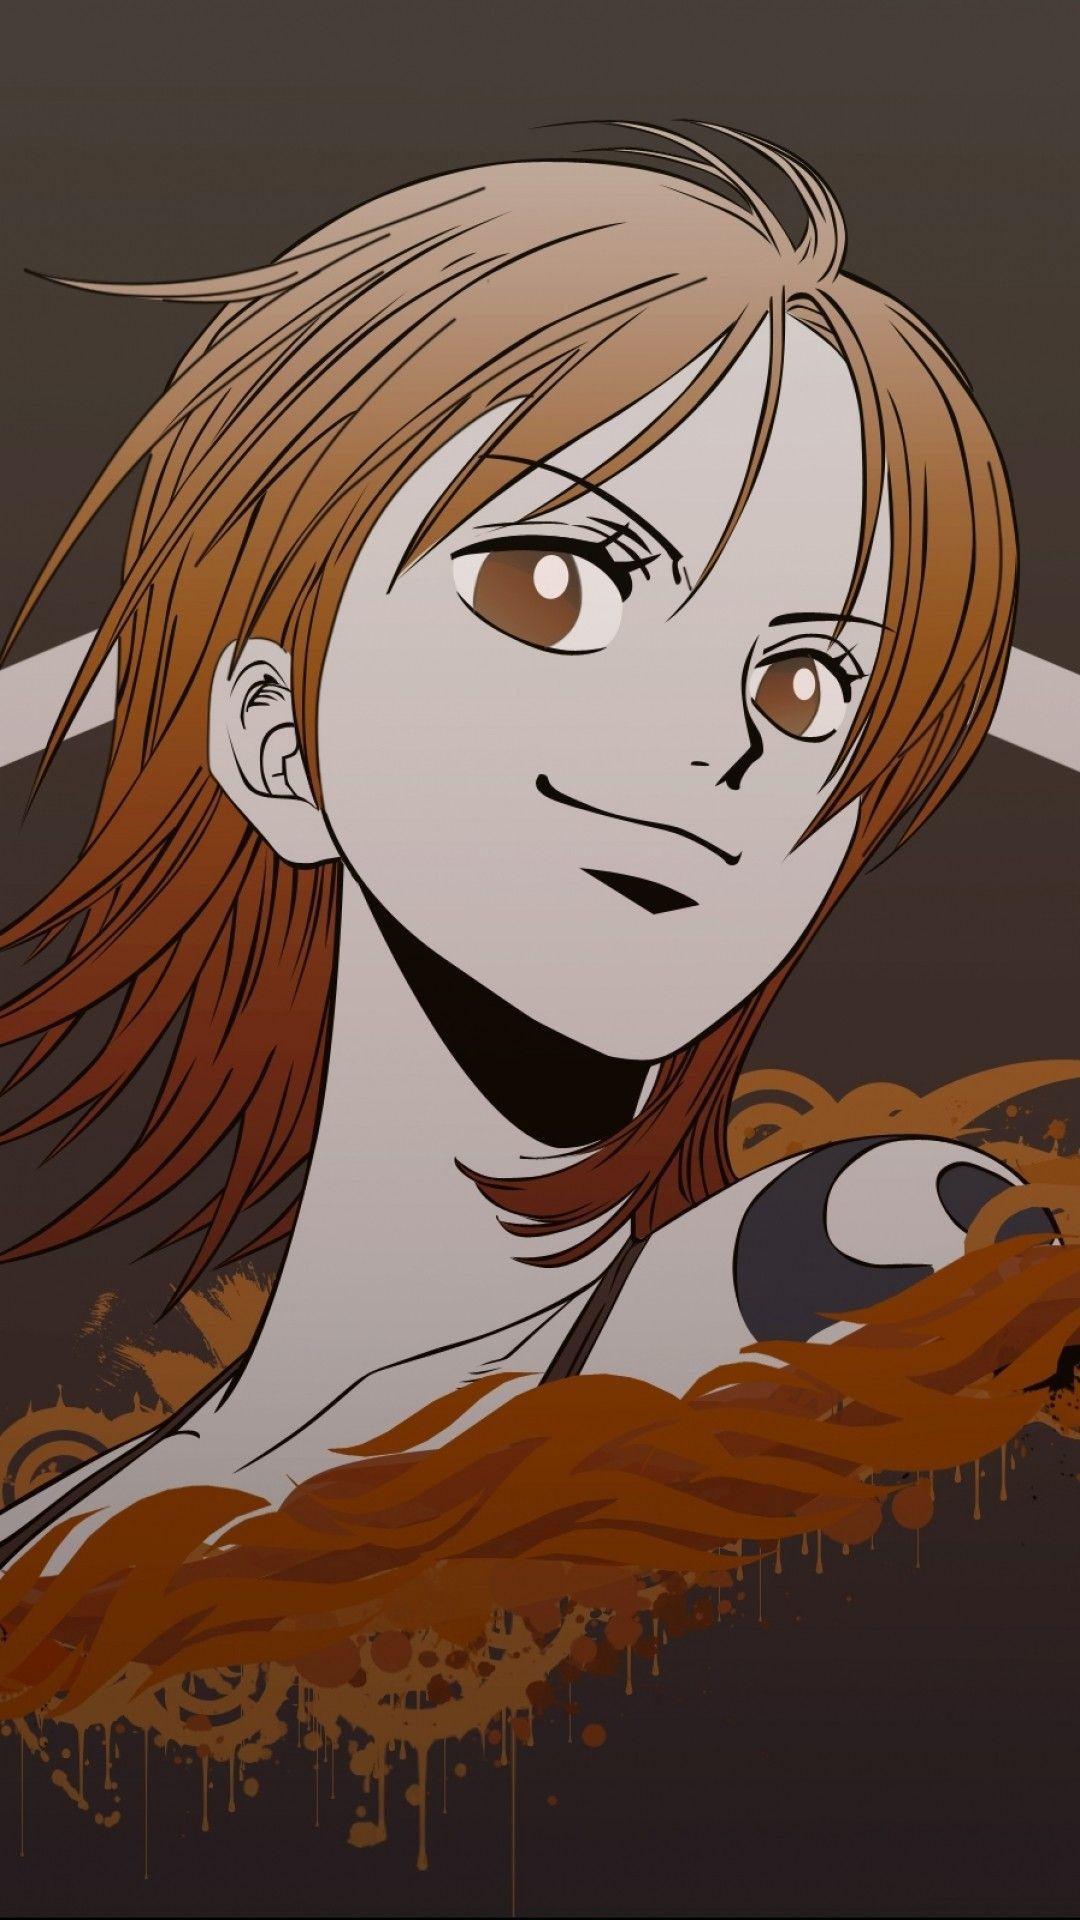 1080 x 1920 · jpeg - Anime One Piece Nami Wallpapers - Wallpaper Cave